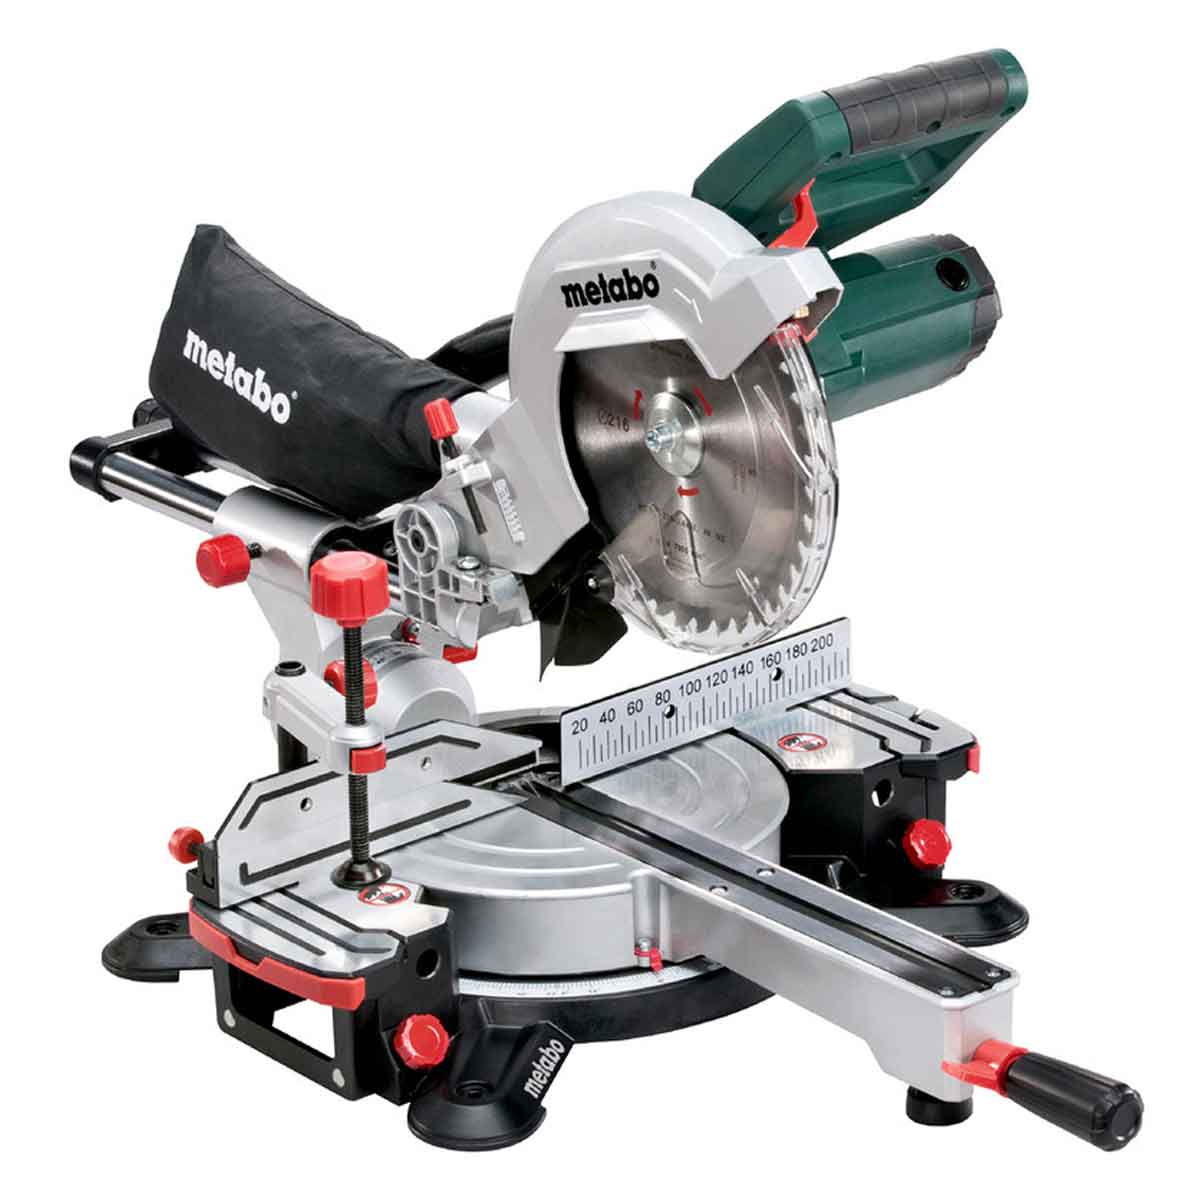 Metabo KGS216M 216mm Sliding Mitre Saw 110V with Leg Stand